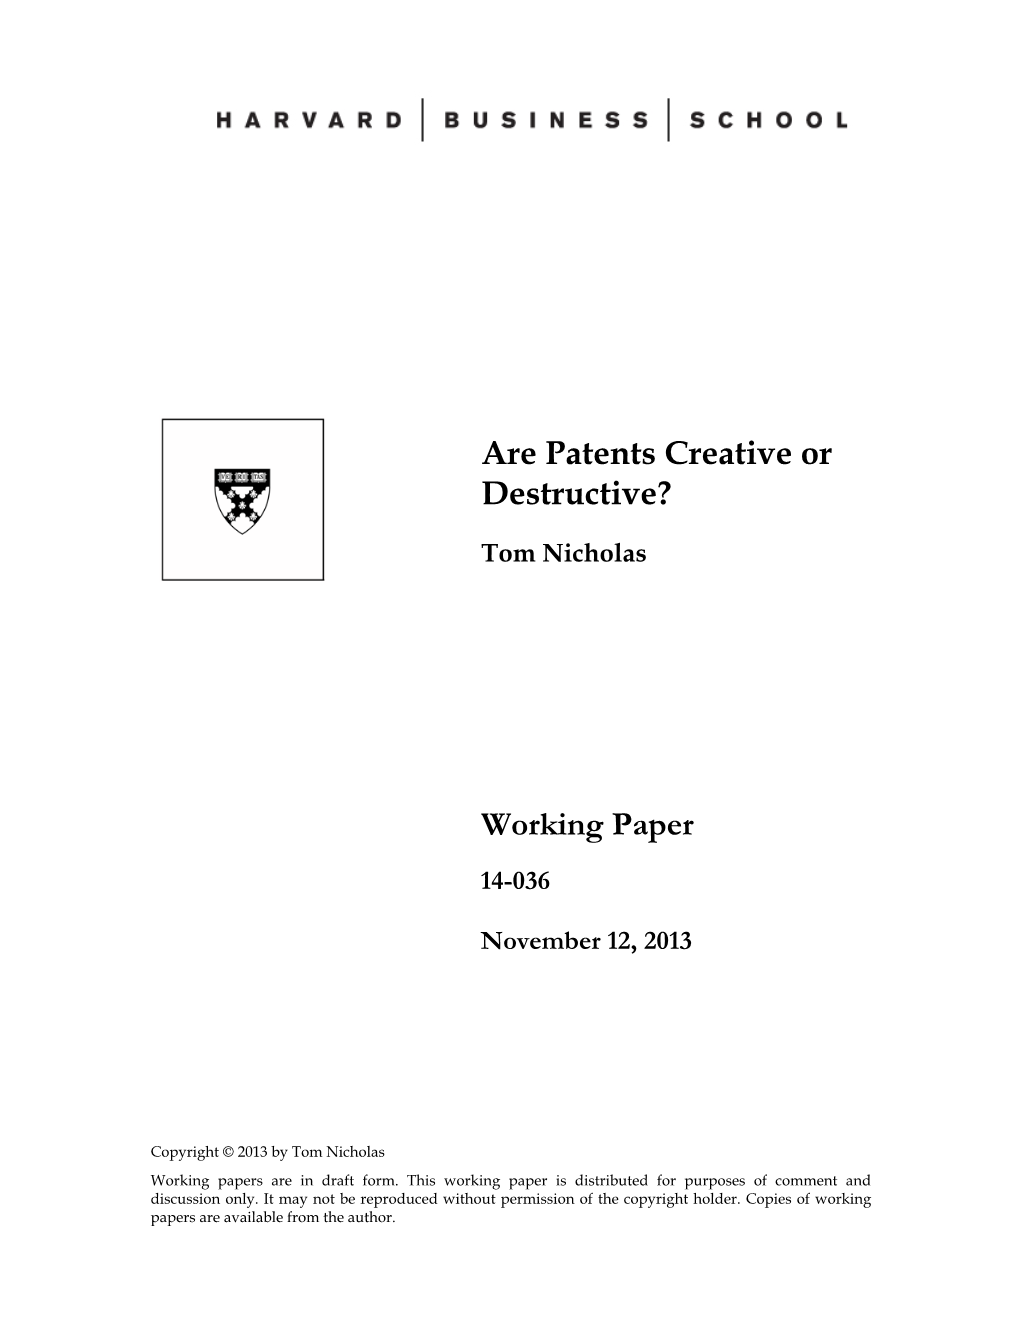 Are Patents Creative Or Destructive? Working Paper